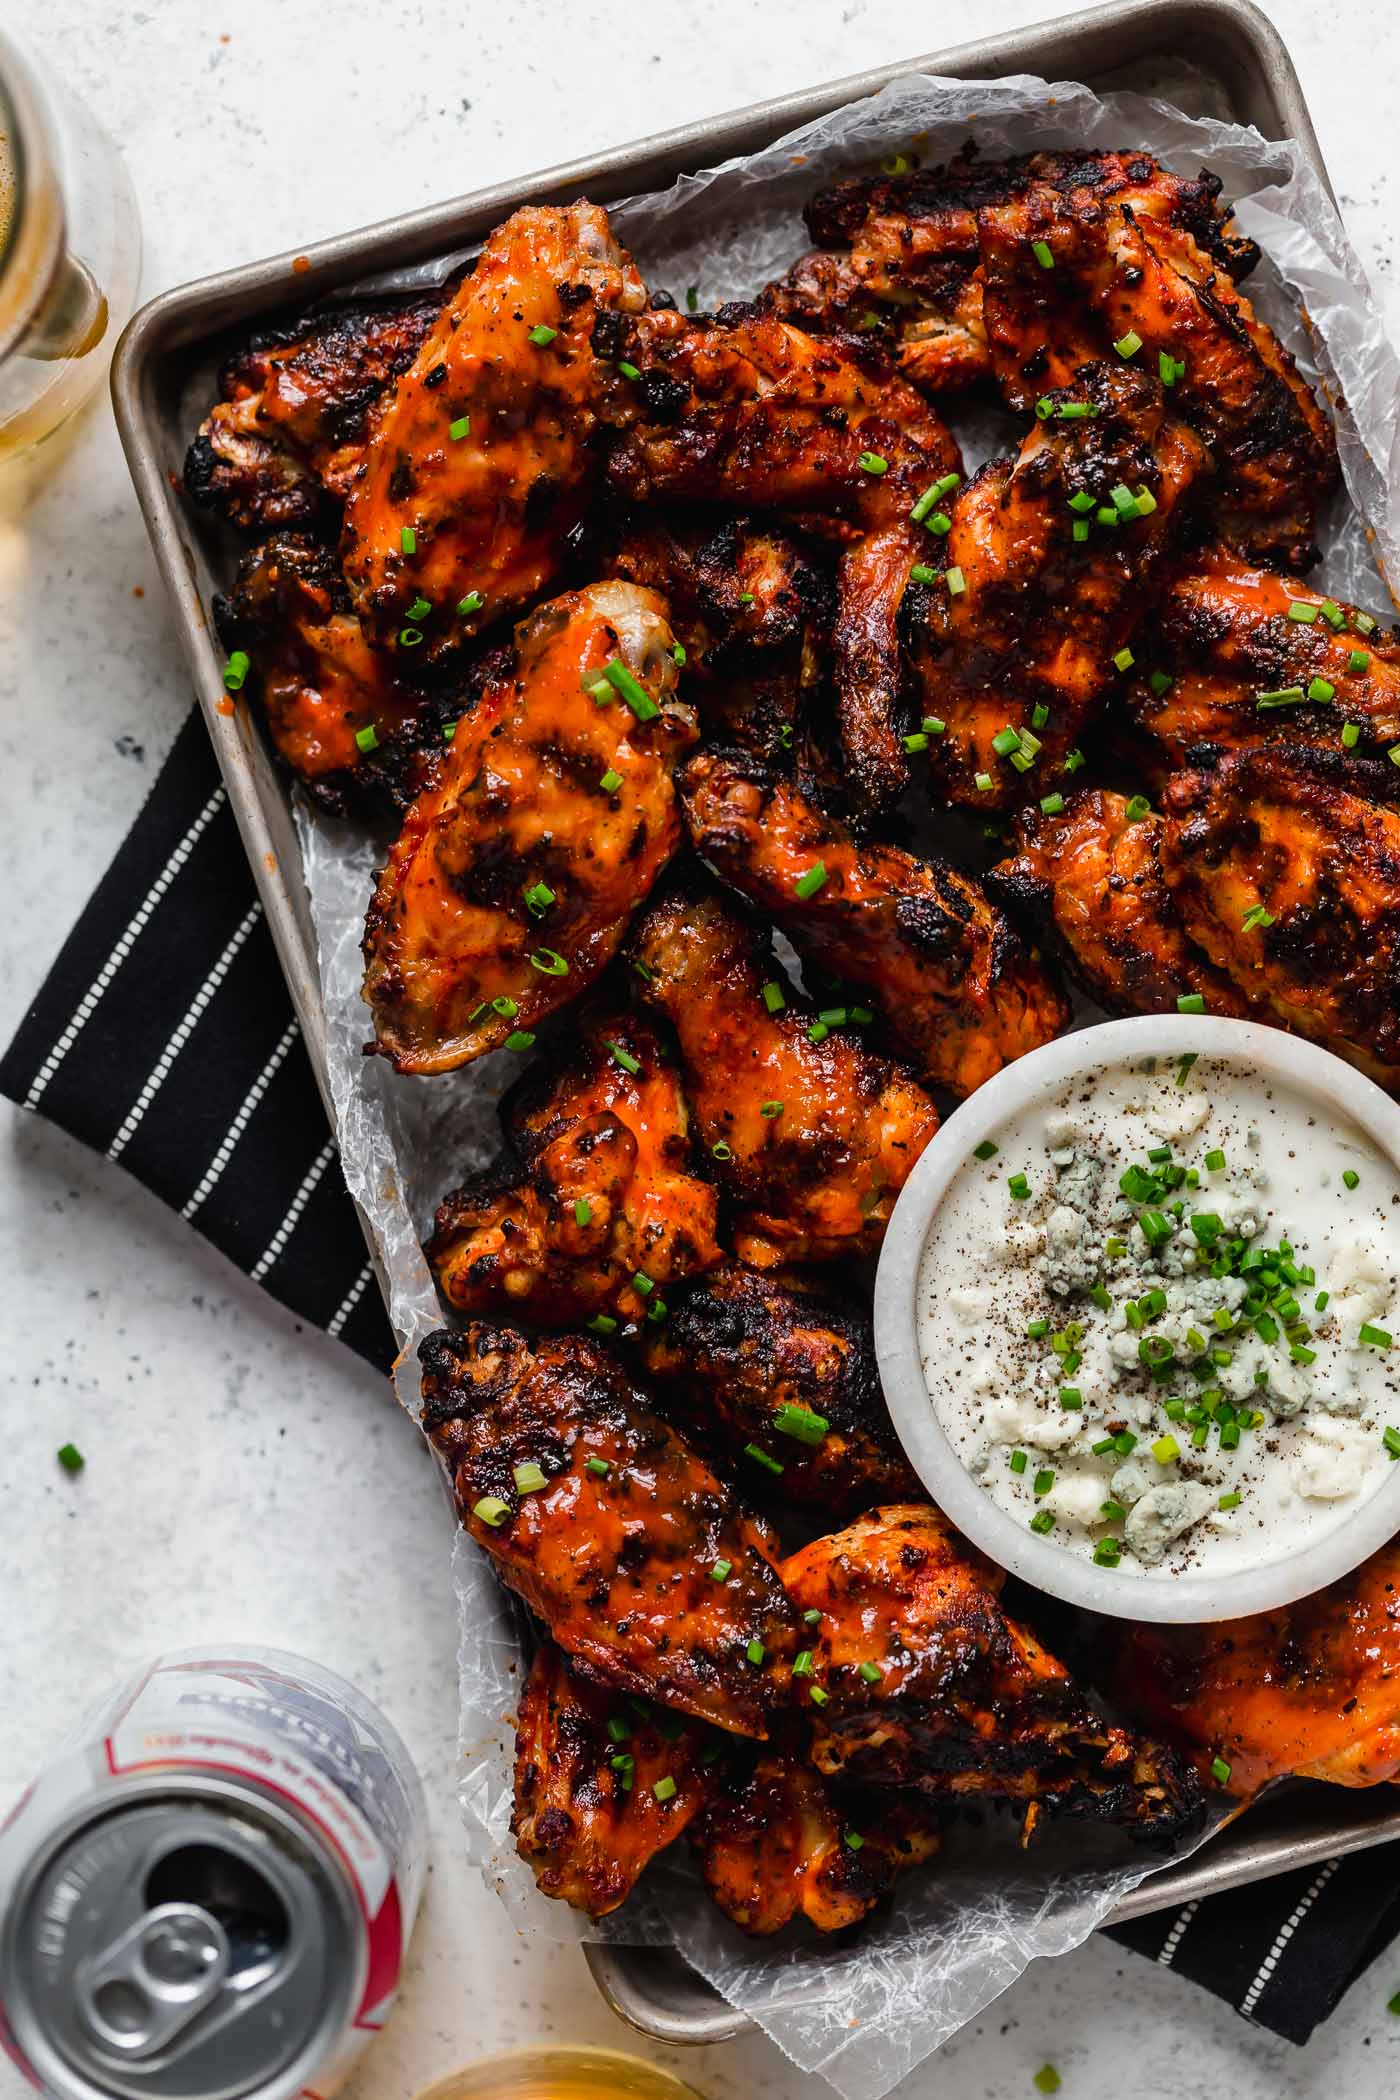 A small baking sheet of grilled chicken wings, topped generously with snipped chives & served with bleu cheese dressing. The tray sits atop a black & white striped linen on a white surface next to a can & a few glasses of PBR beer.